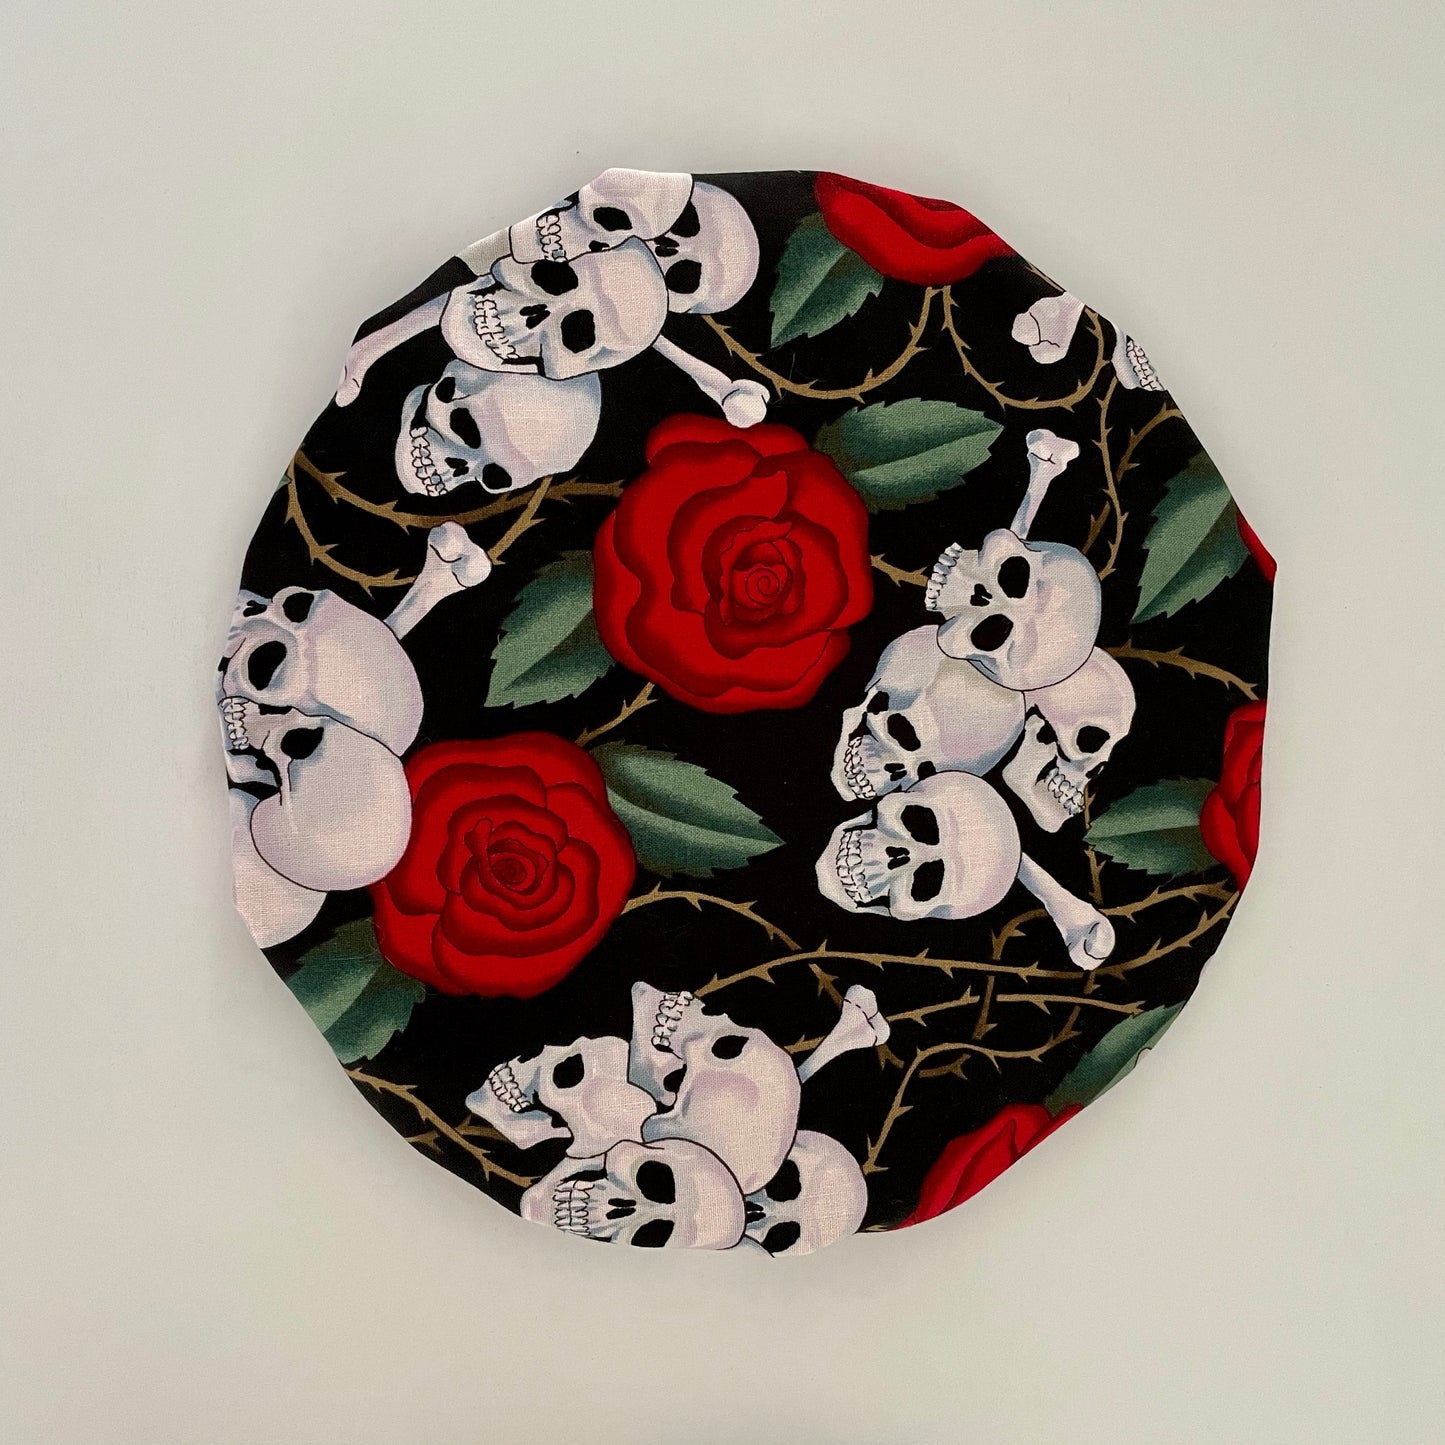 Stand Mixer Bowl Covers - Skulls and Roses